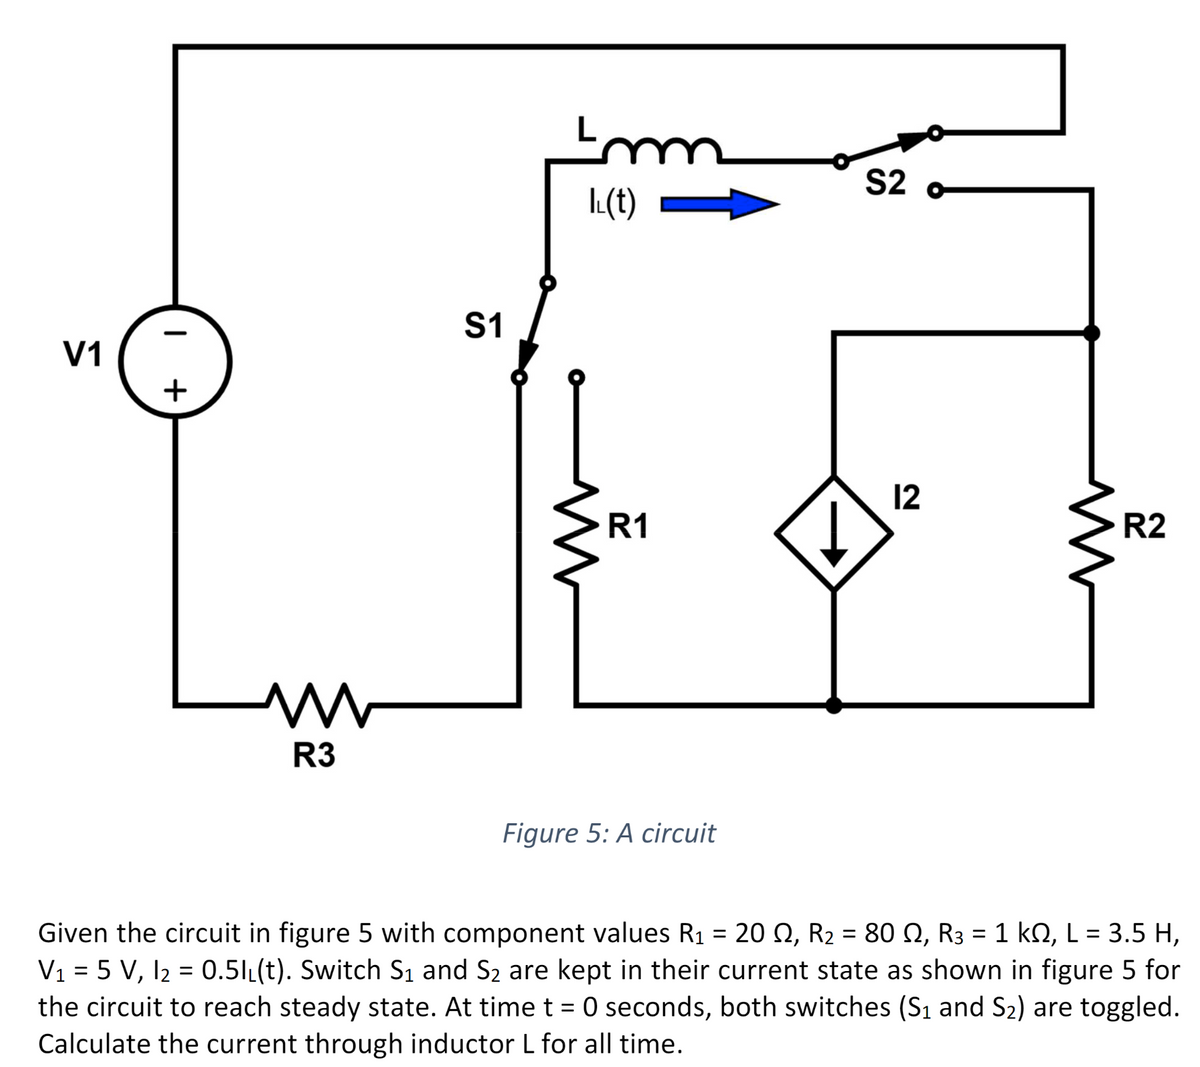 V1
I
+
L
M ww
R3
S1
Imm
LL(t)
R1
Figure 5: A circuit
S2
12
www
R2
Given the circuit in figure 5 with component values R₁ = 20 №, R₂ = 80 N, R3 = 1 kN, L = 3.5 H,
V₁ = 5 V, 1₂ = 0.51₁(t). Switch S₁ and S₂ are kept in their current state as shown in figure 5 for
the circuit to reach steady state. At time t = 0 seconds, both switches (S₁ and S₂) are toggled.
Calculate the current through inductor L for all time.